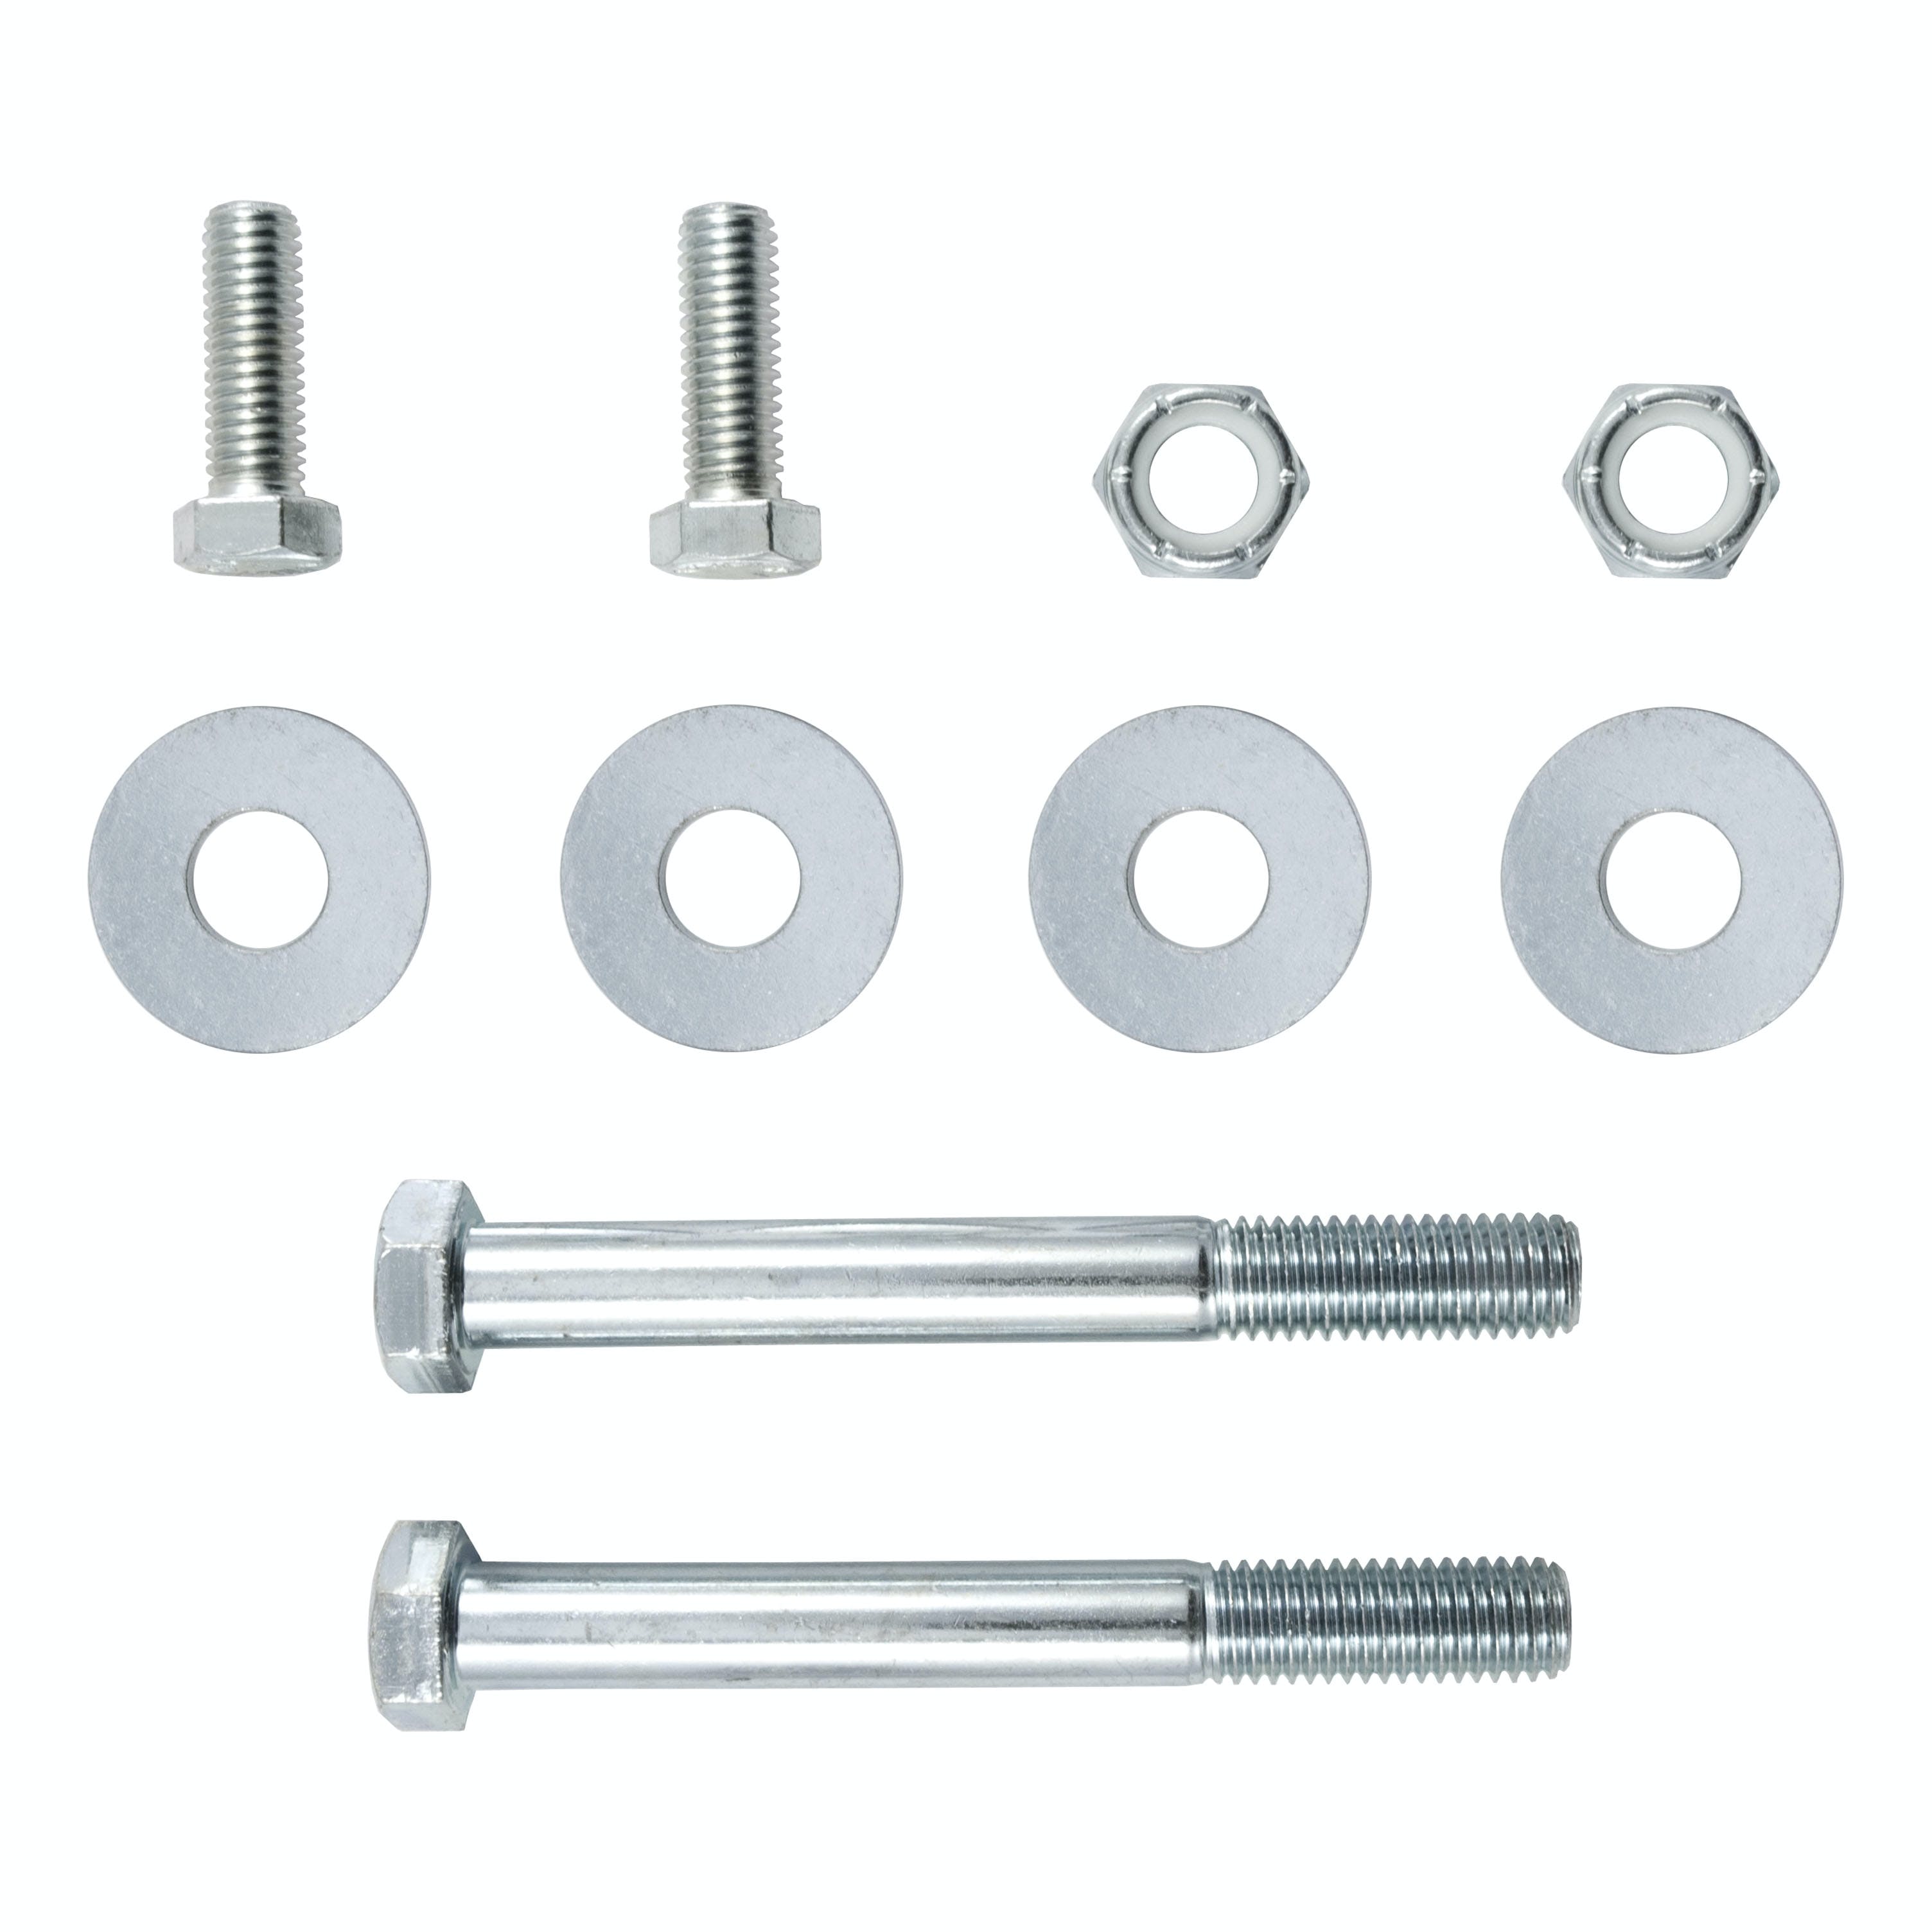 CURT 48620 Channel-Style Lunette Ring Hardware Kit